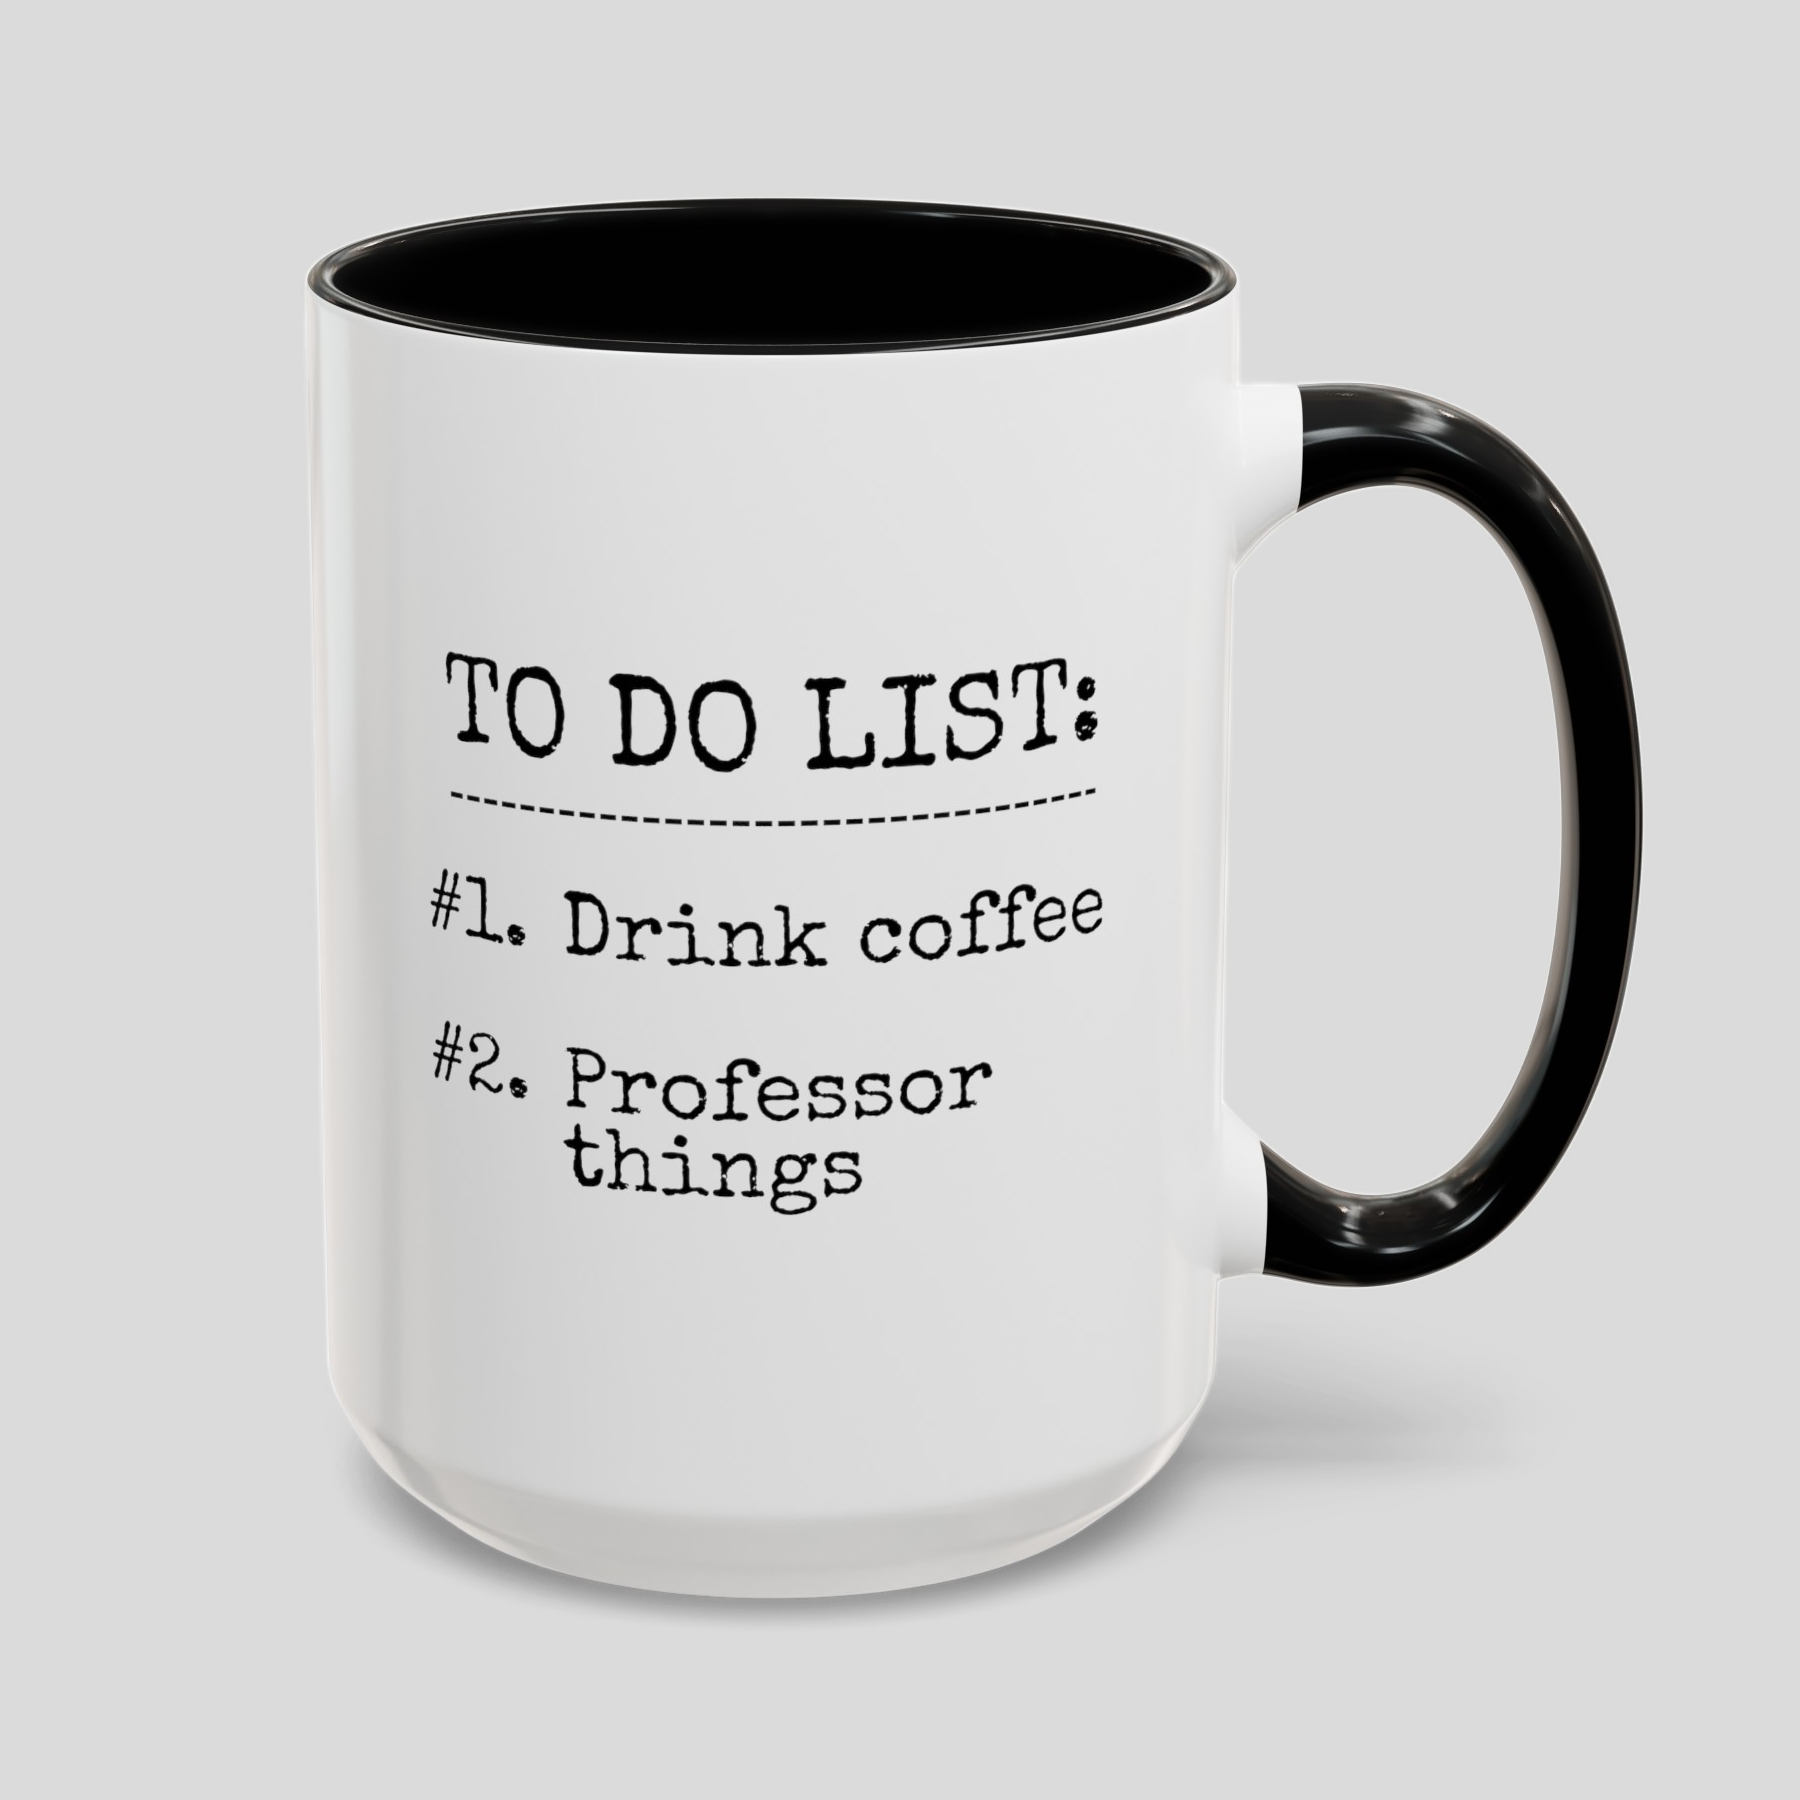 To Do List Drink Coffee Professor Things 15oz white with black accent funny large coffee mug gift for best college teacher instructor educator waveywares wavey wares wavywares wavy wares cover